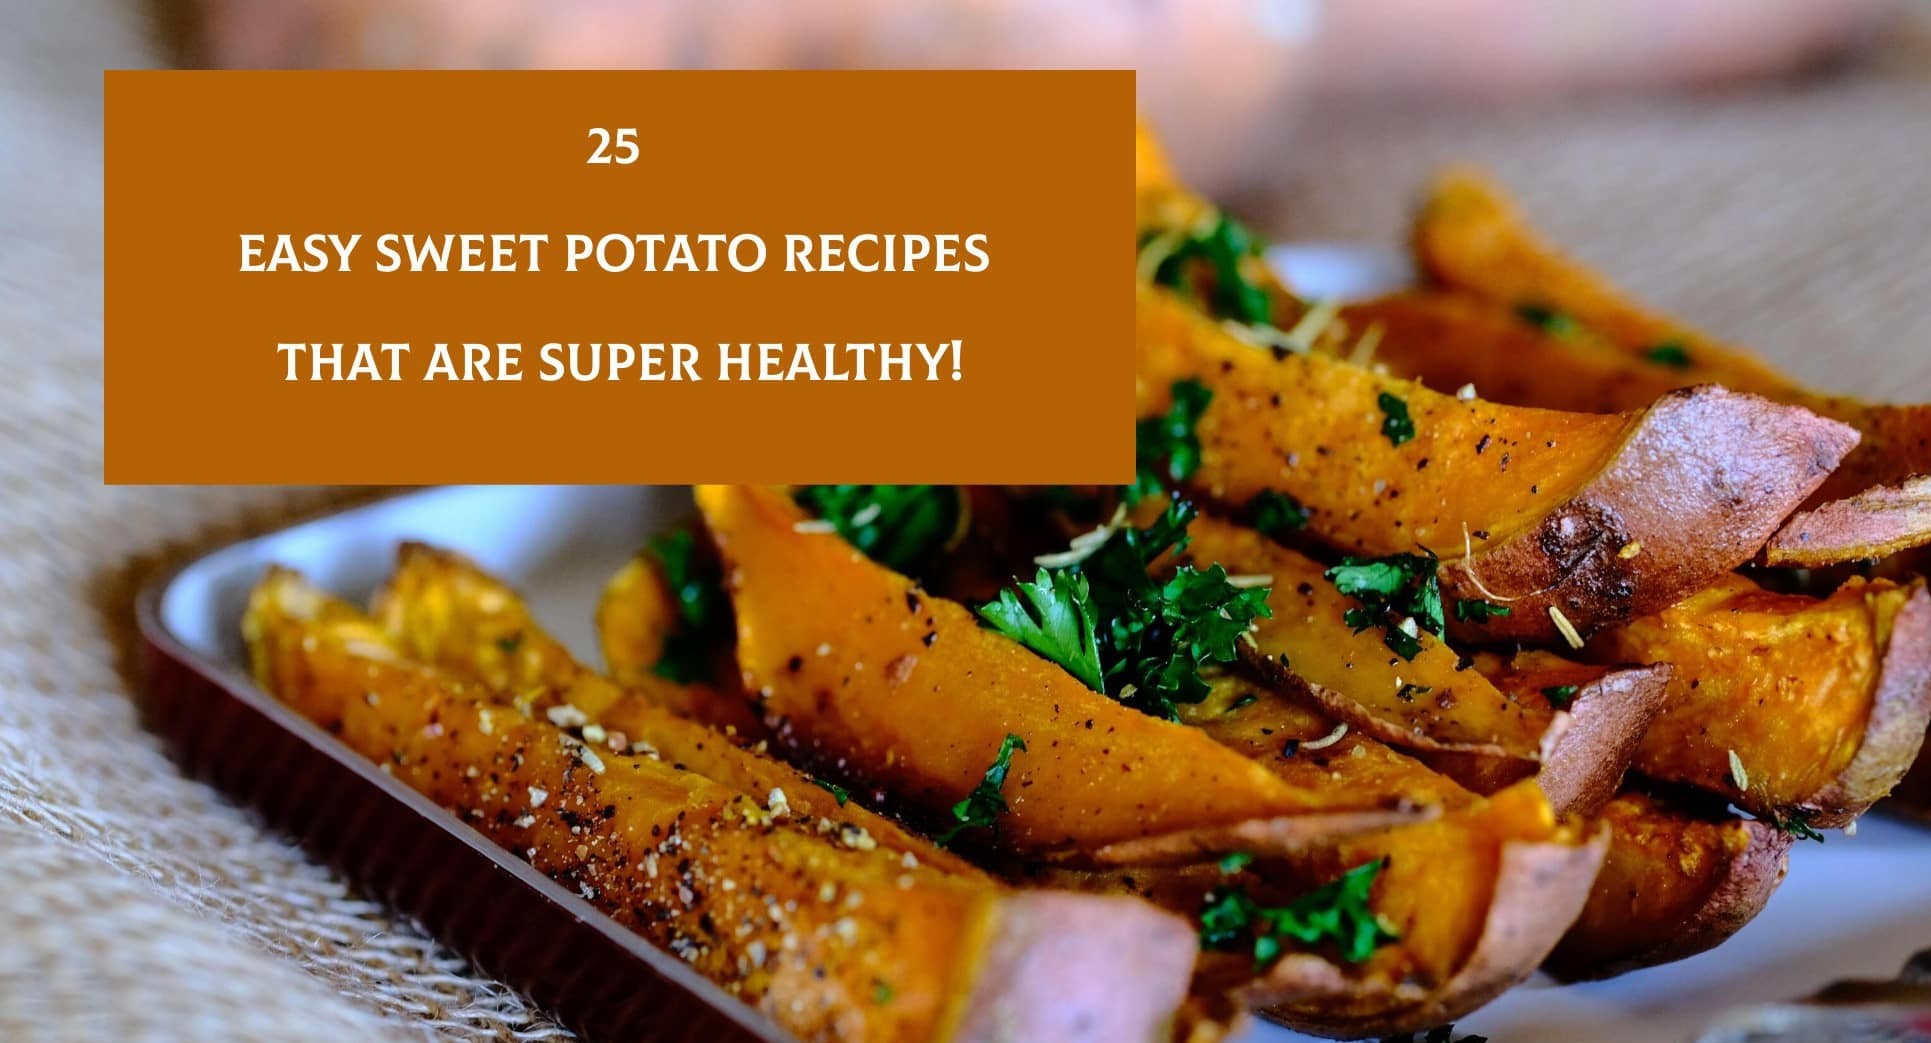 25 Easy Sweet Potato Recipes That Are Super Healthy!